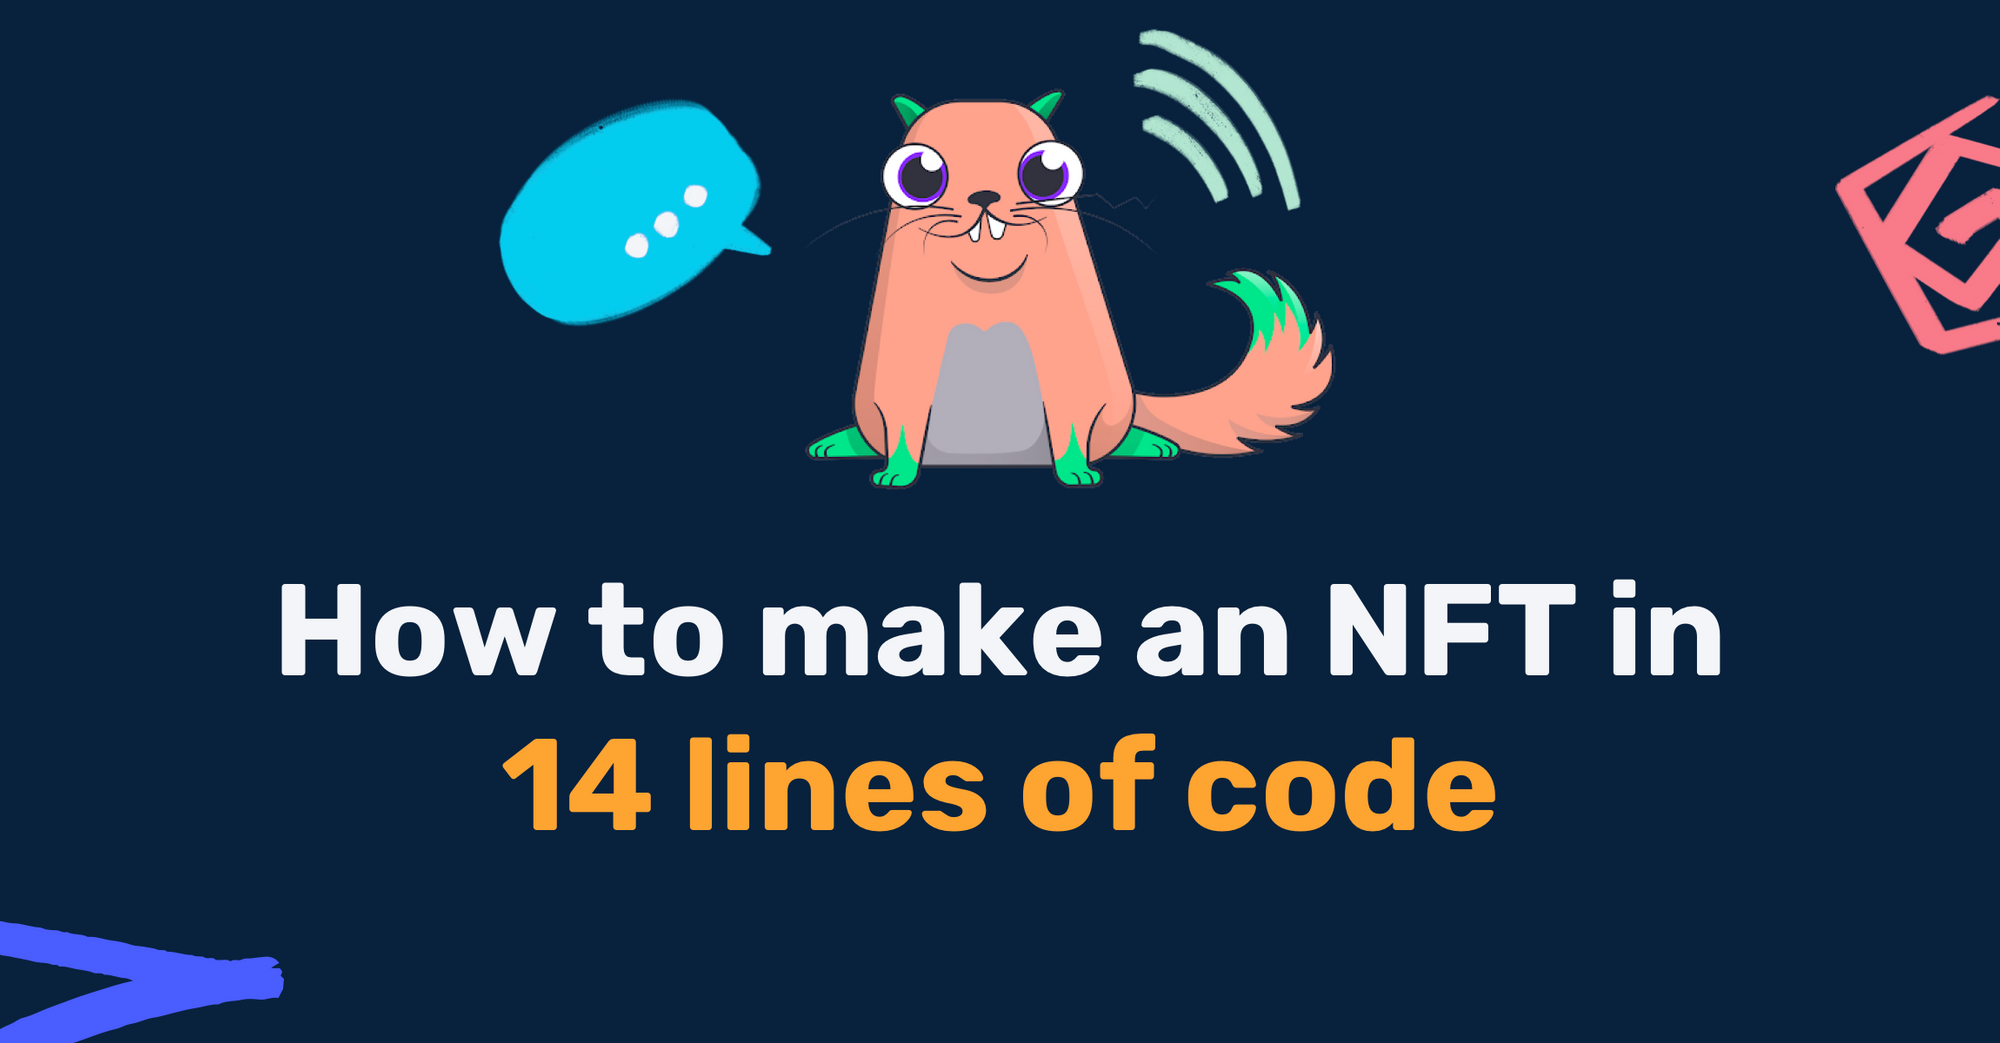 How to Make an NFT in 14 Lines of Code